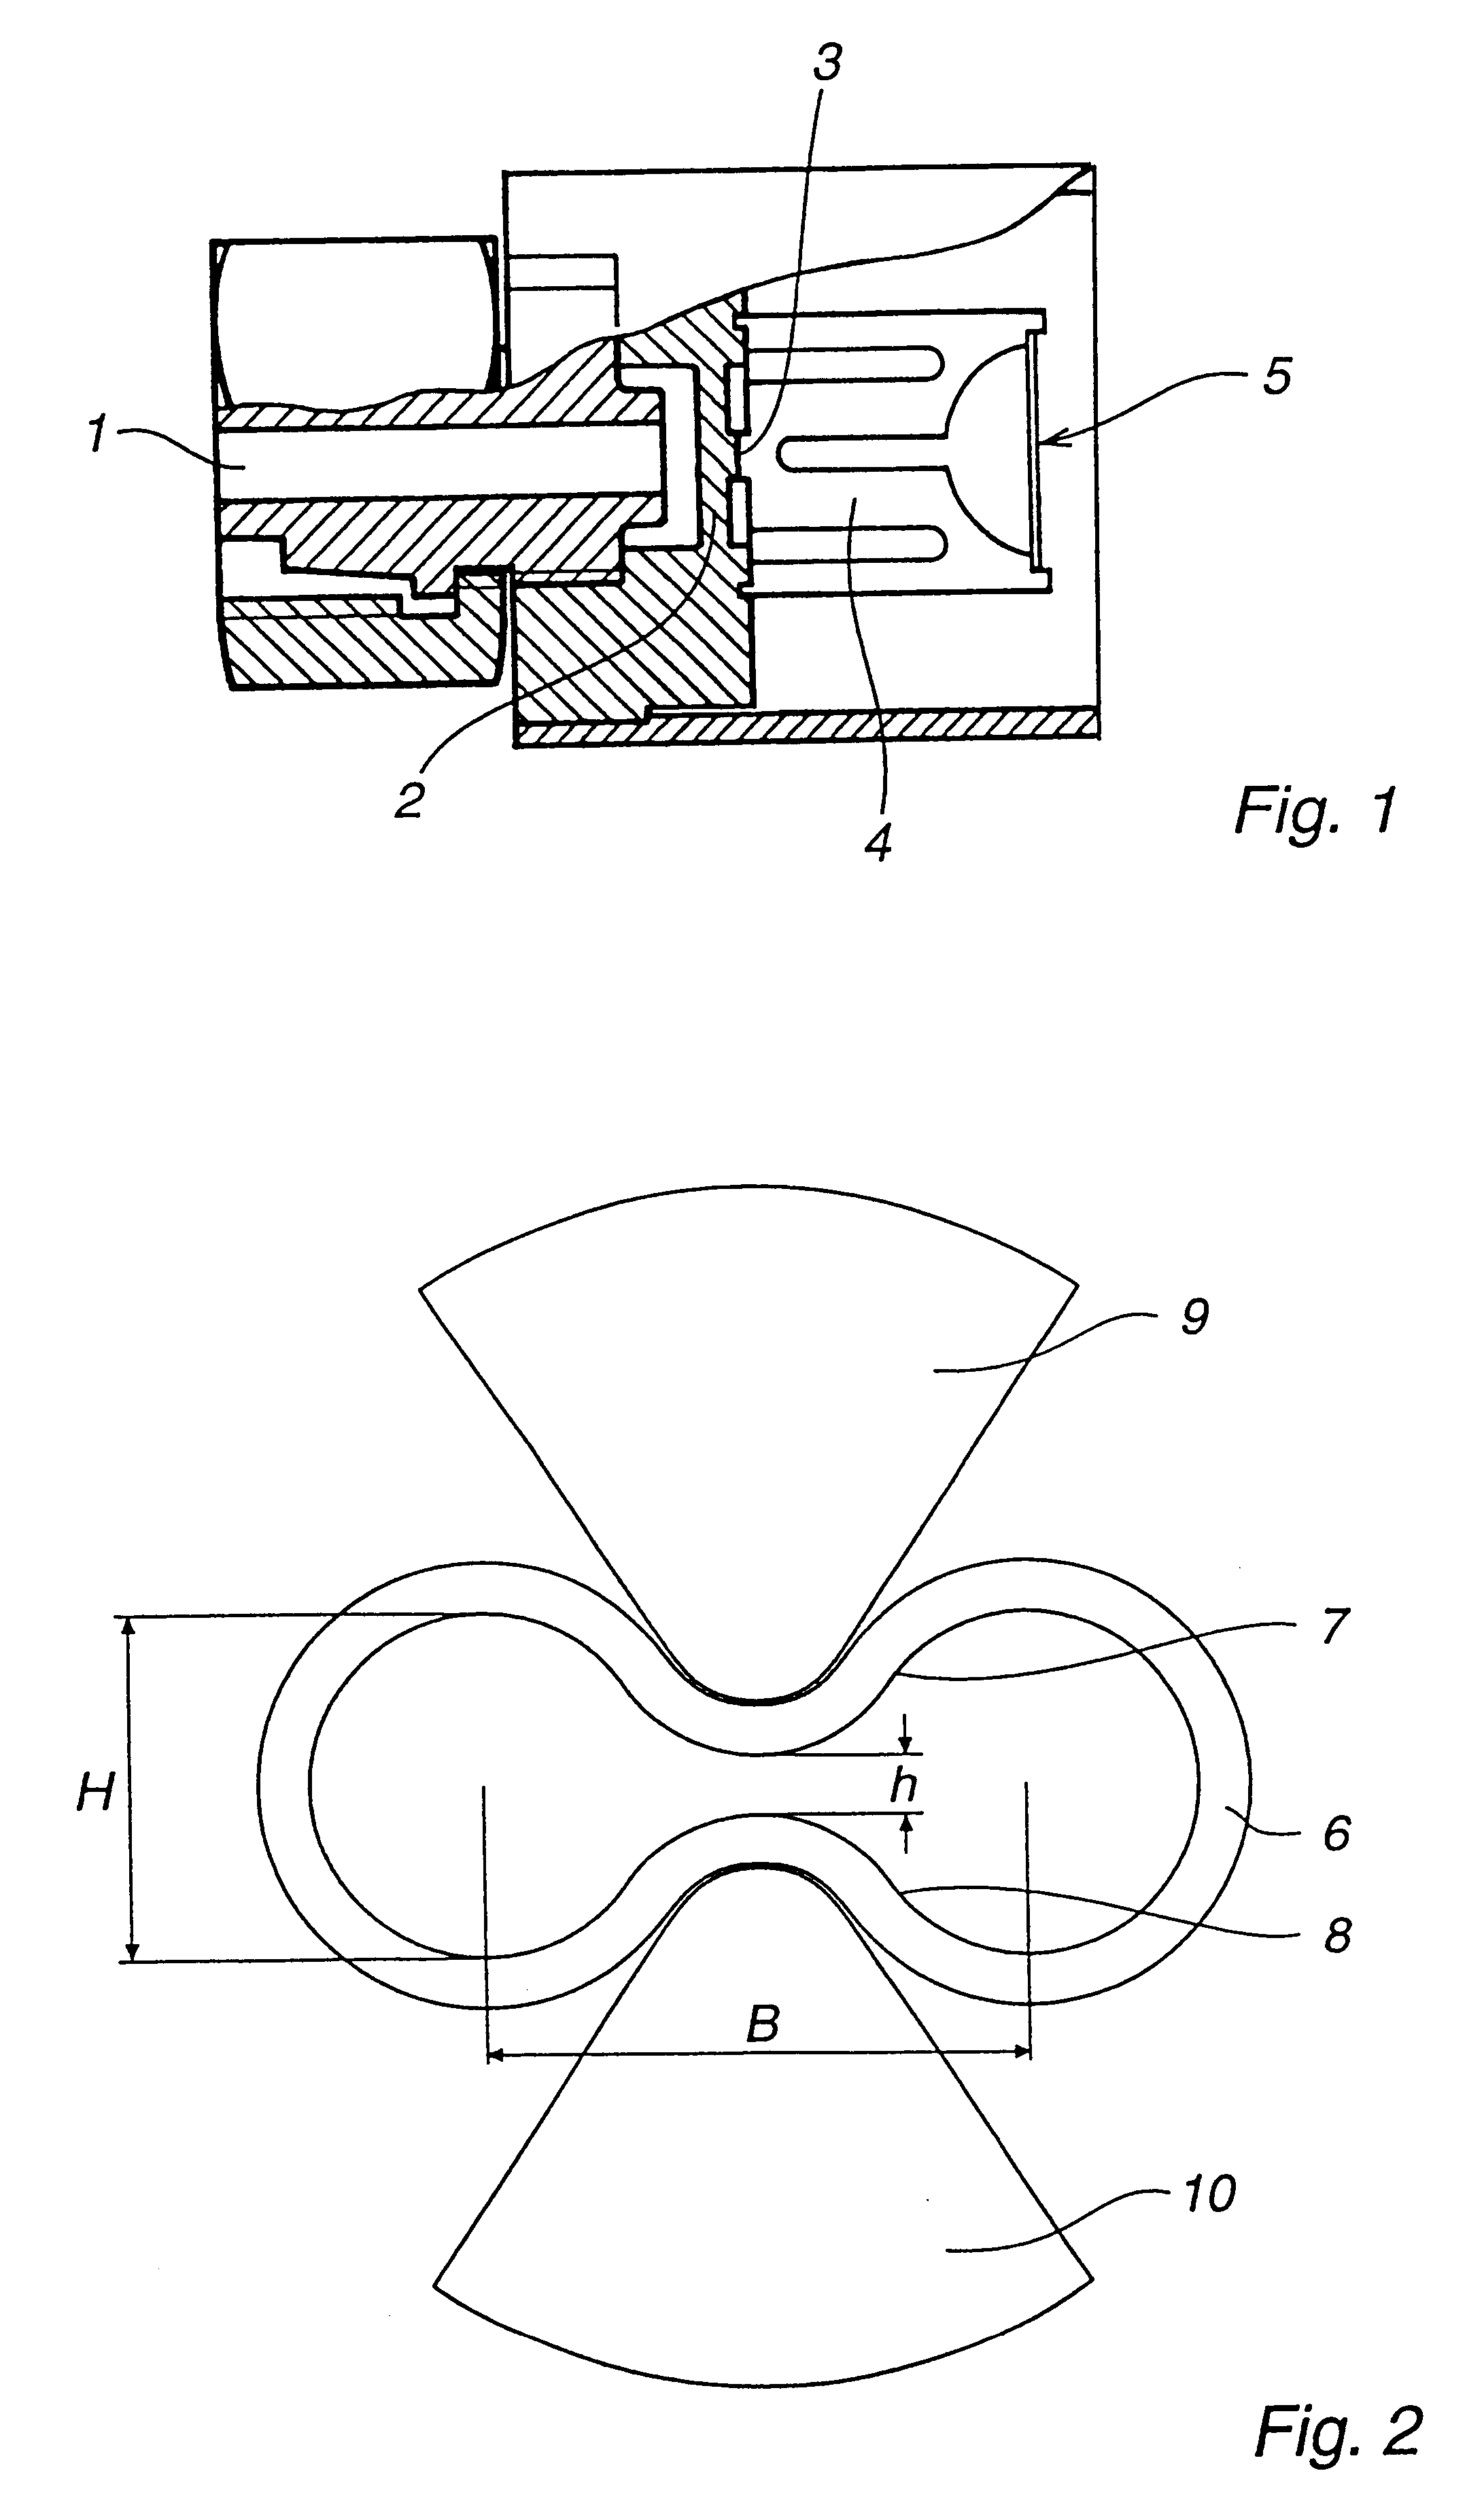 Pressure sensor for measurement of gas pressure in a cylinder of a combustion engine